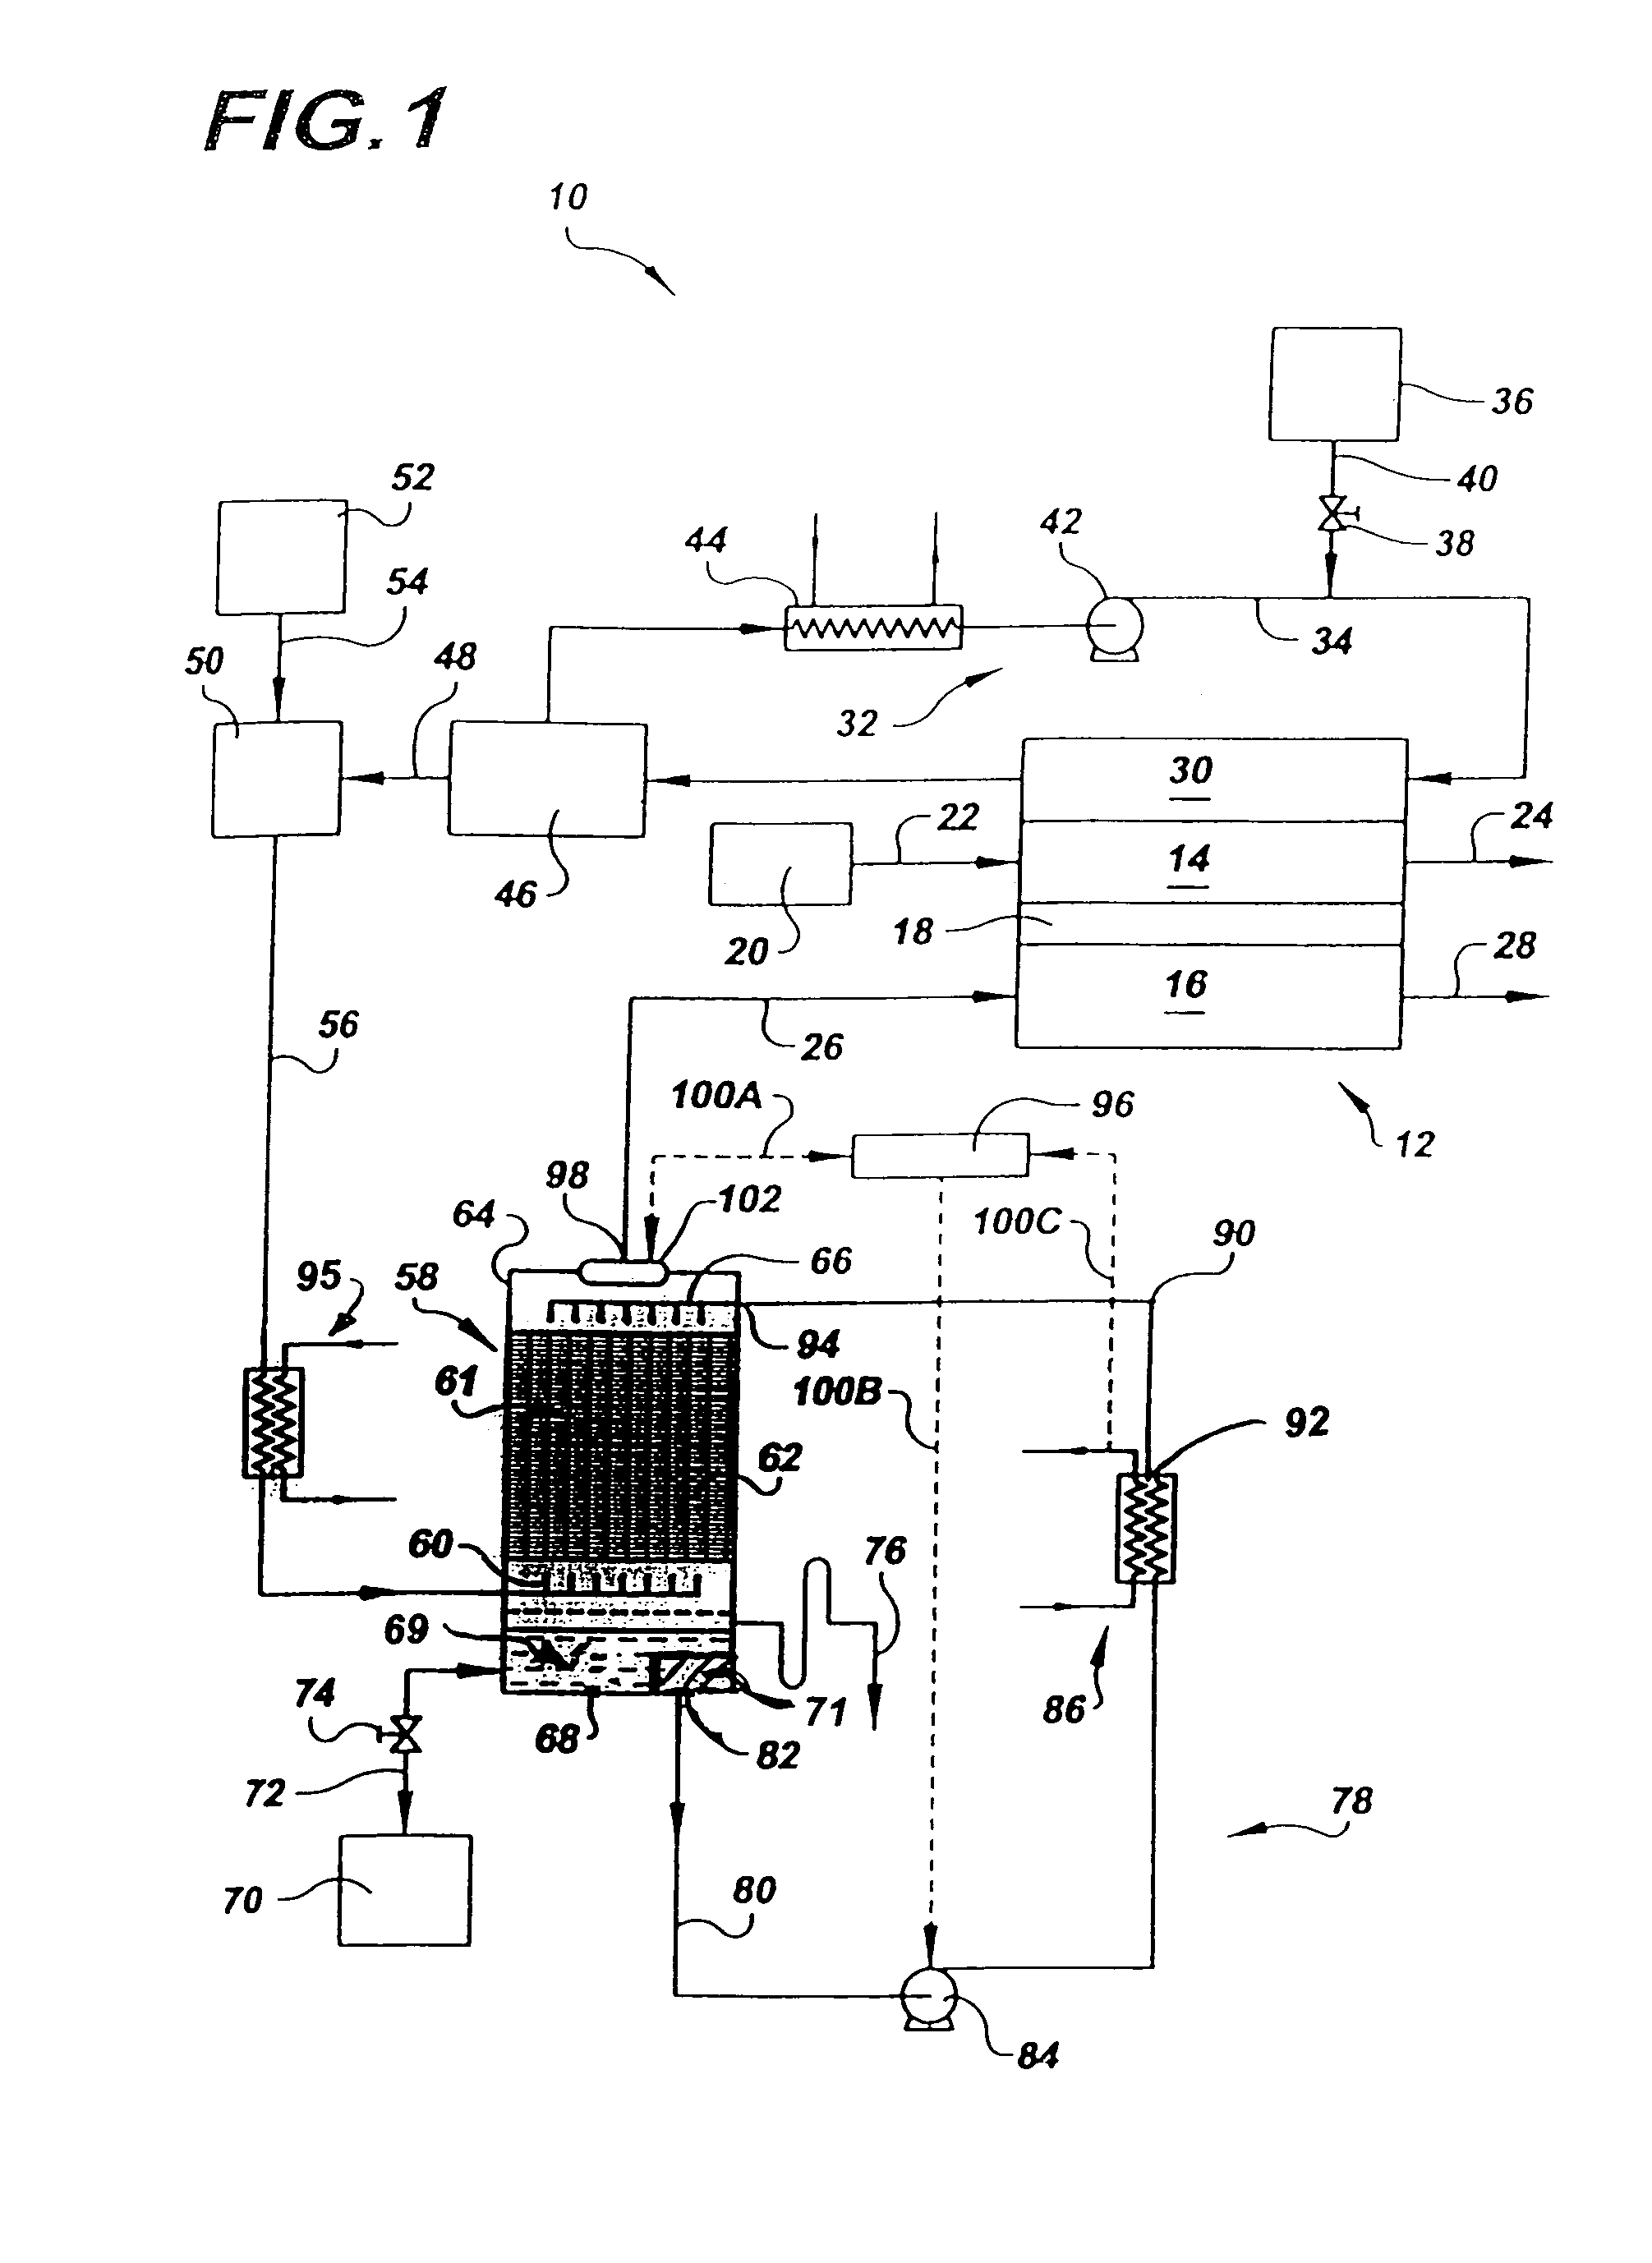 Integrated contaminant separator and water-control loop for a fuel reactant stream